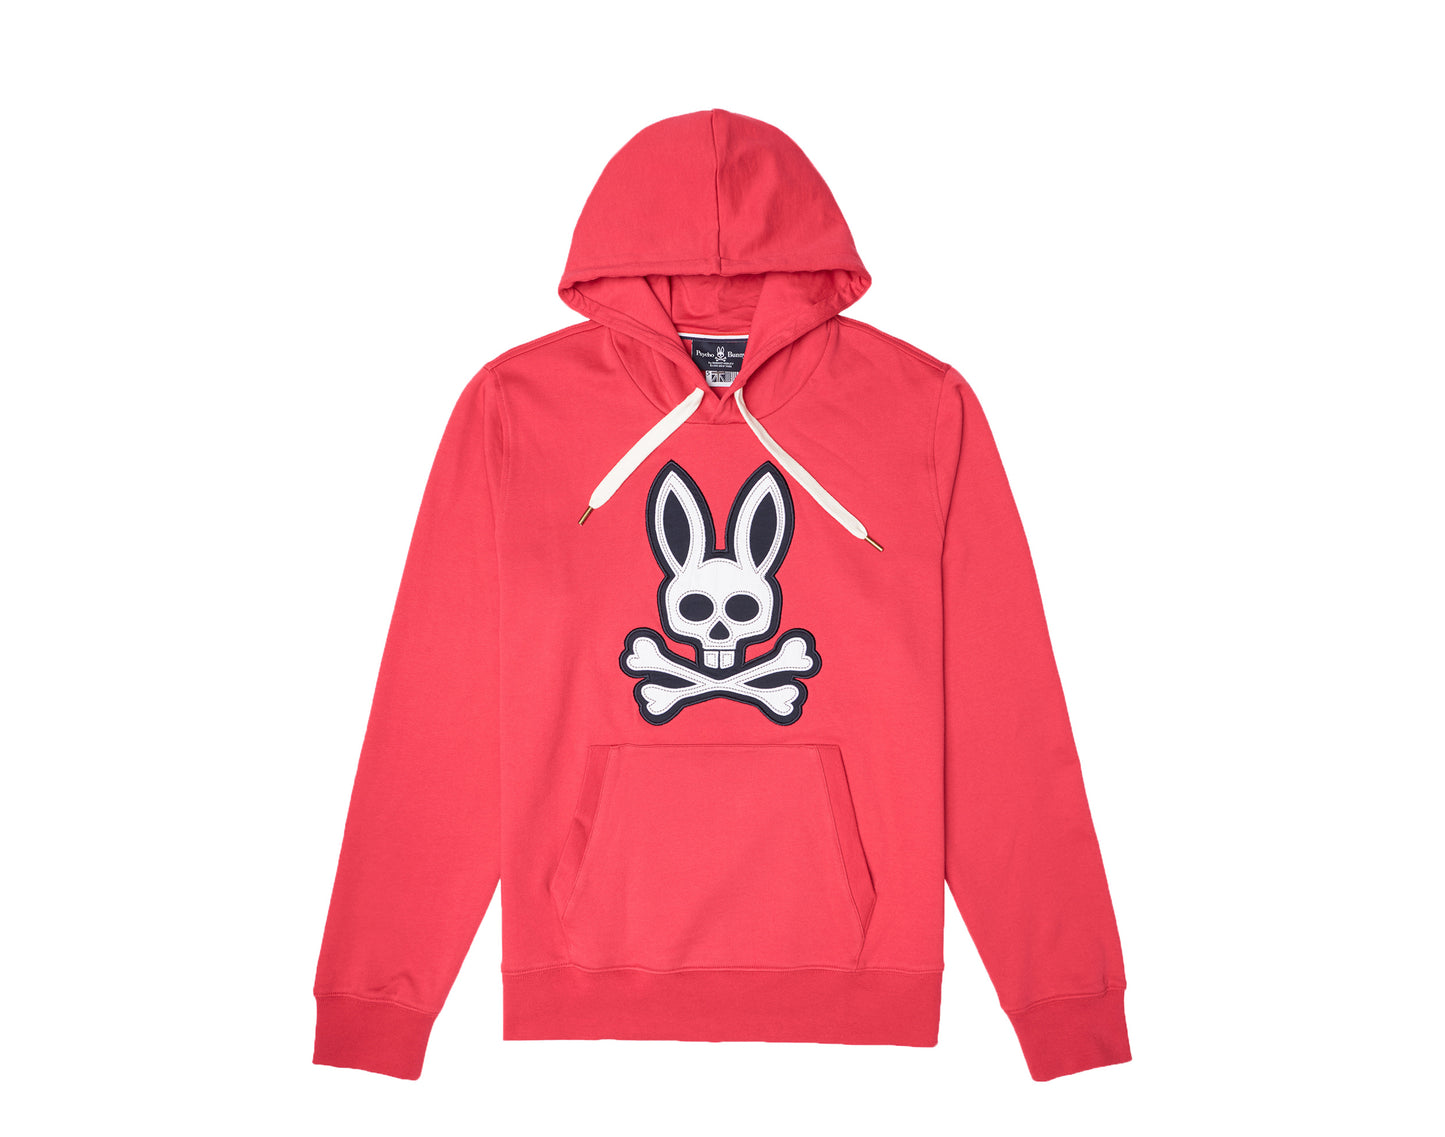 Psycho Bunny Snowden Pull-Over Lingonberry Red Men's Hoodie B6H481G1FL-LRY